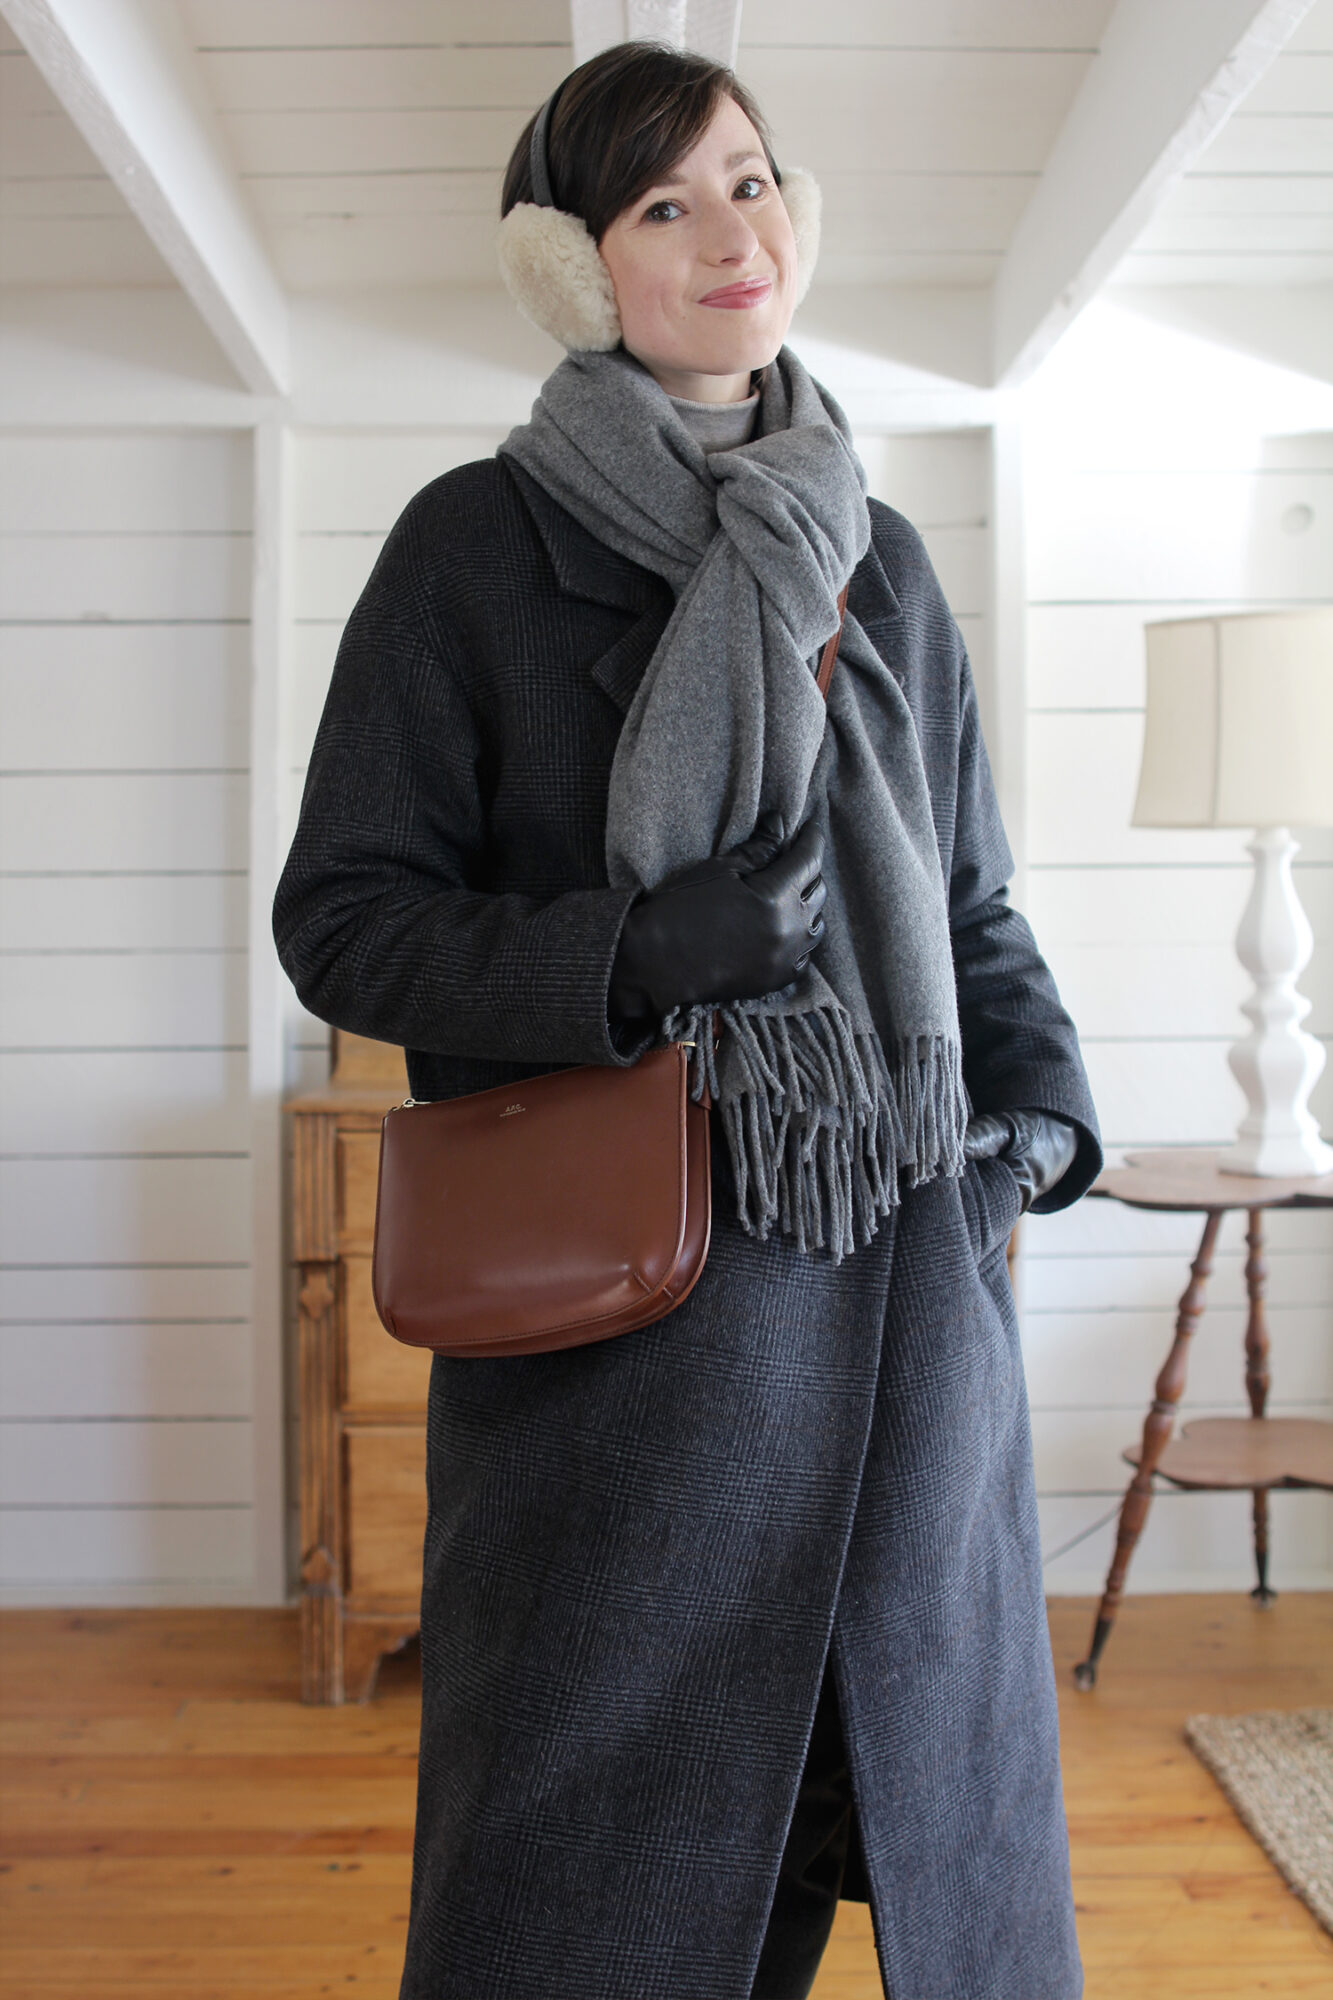 Now She Can Look Chic and Stay Warm — Pure Enchantment